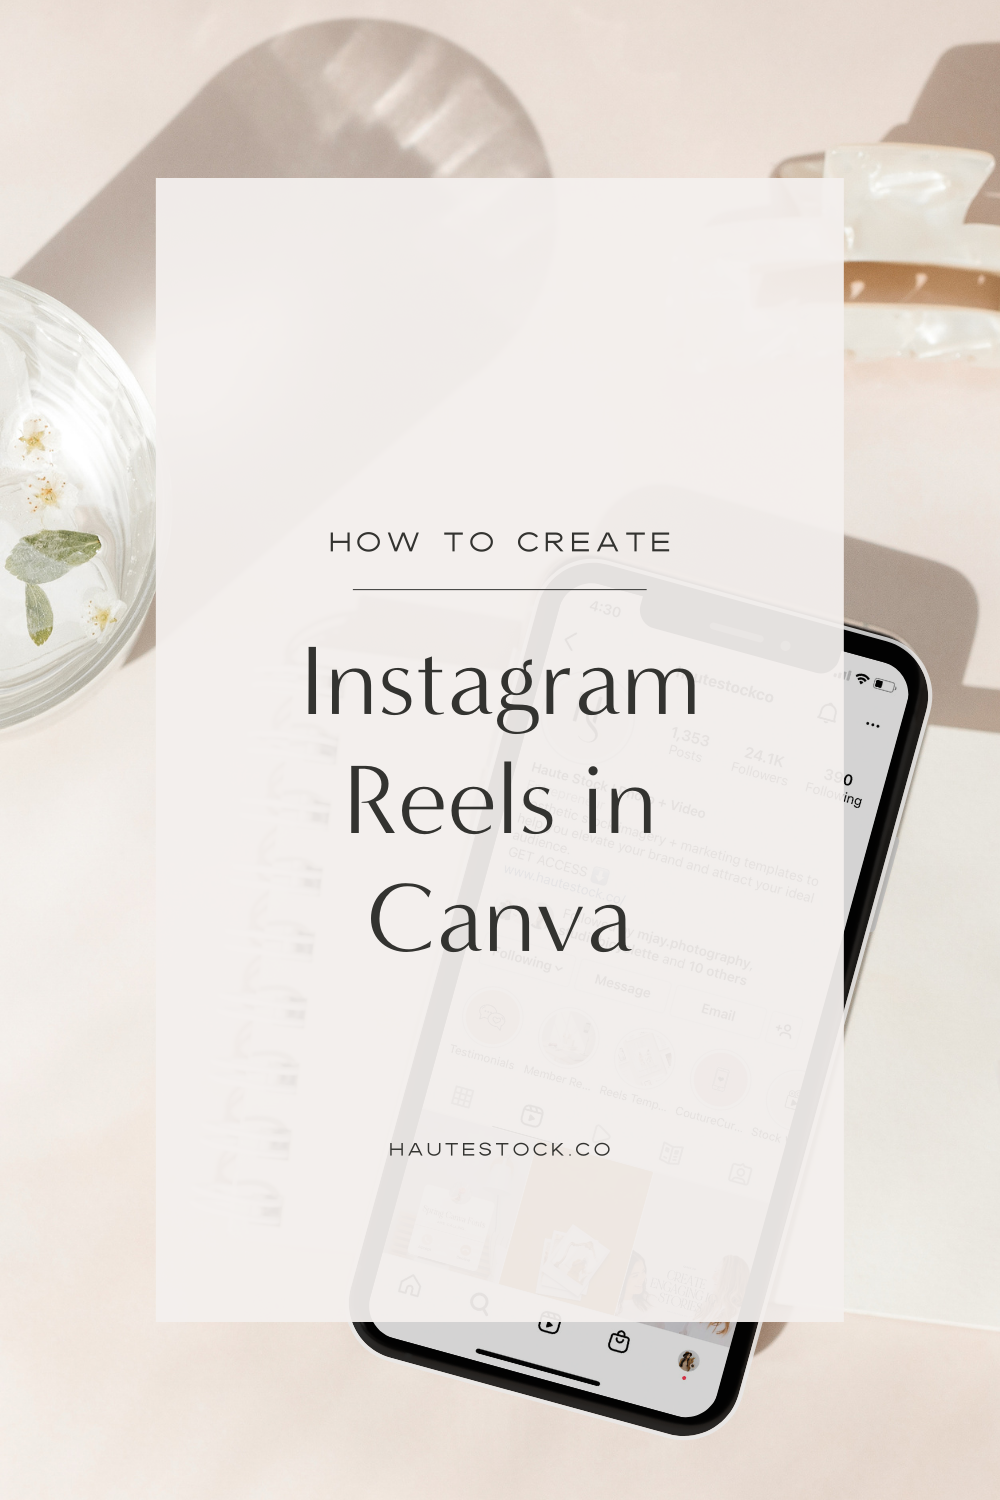 How to Create Instagram Reels in Canva